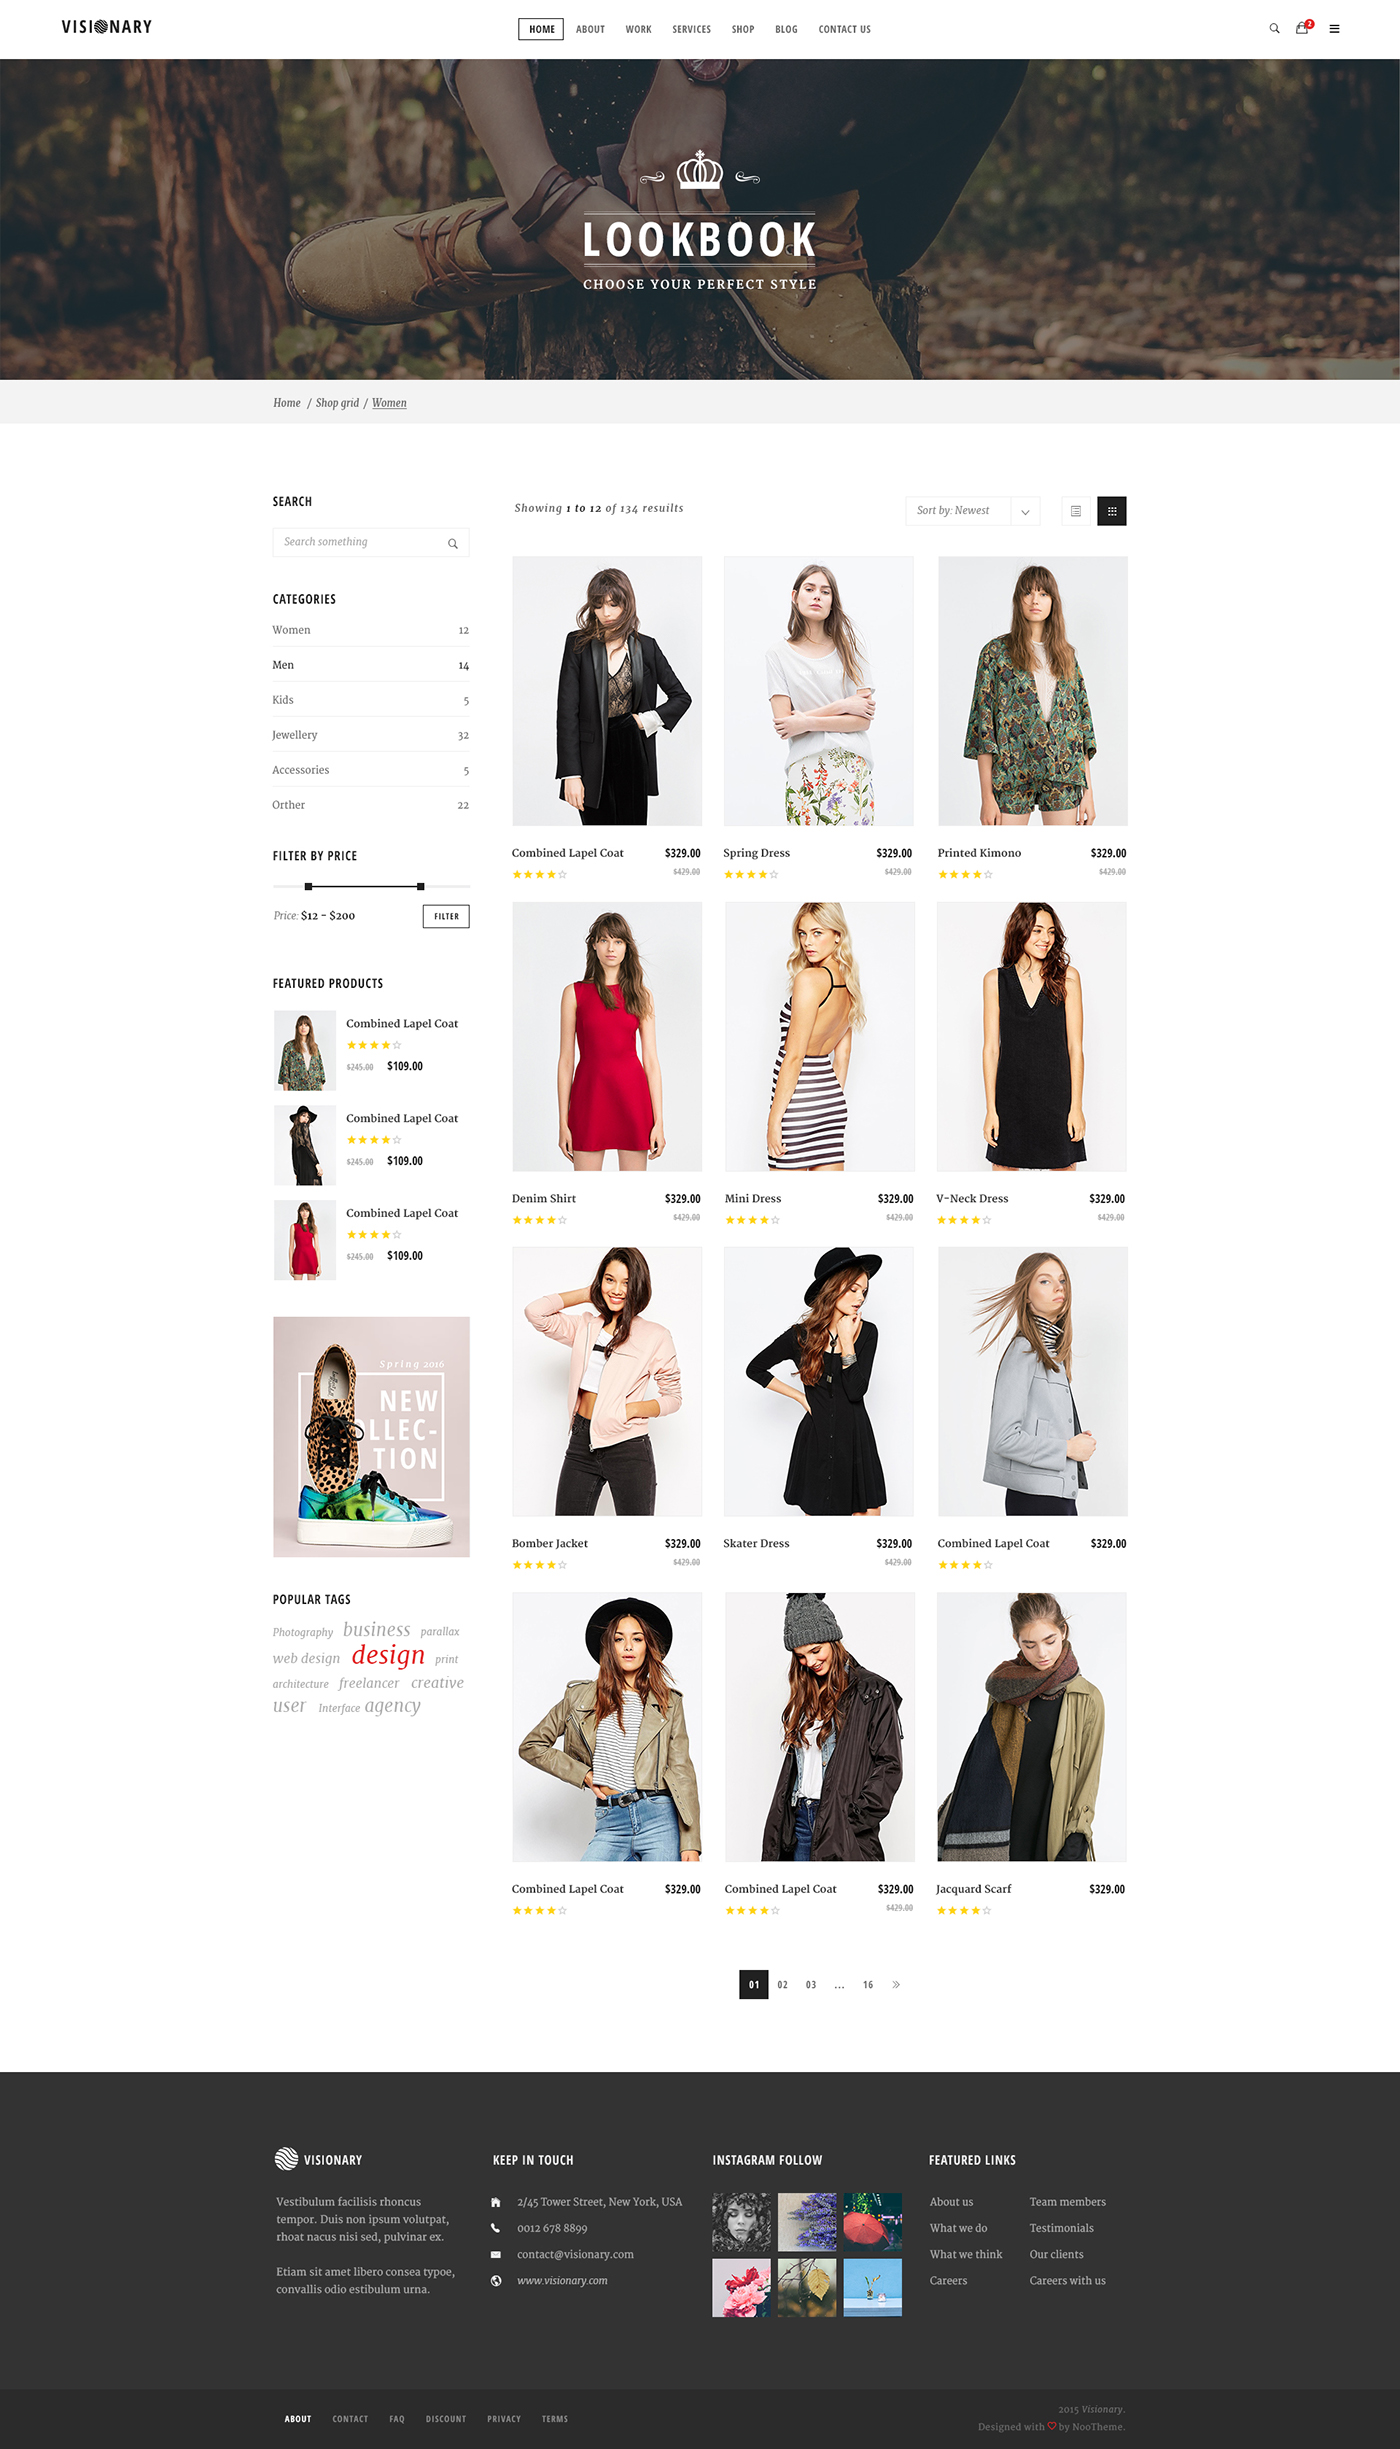 'fashion'  Ecommerce shop online shopping psd template Multiconcept